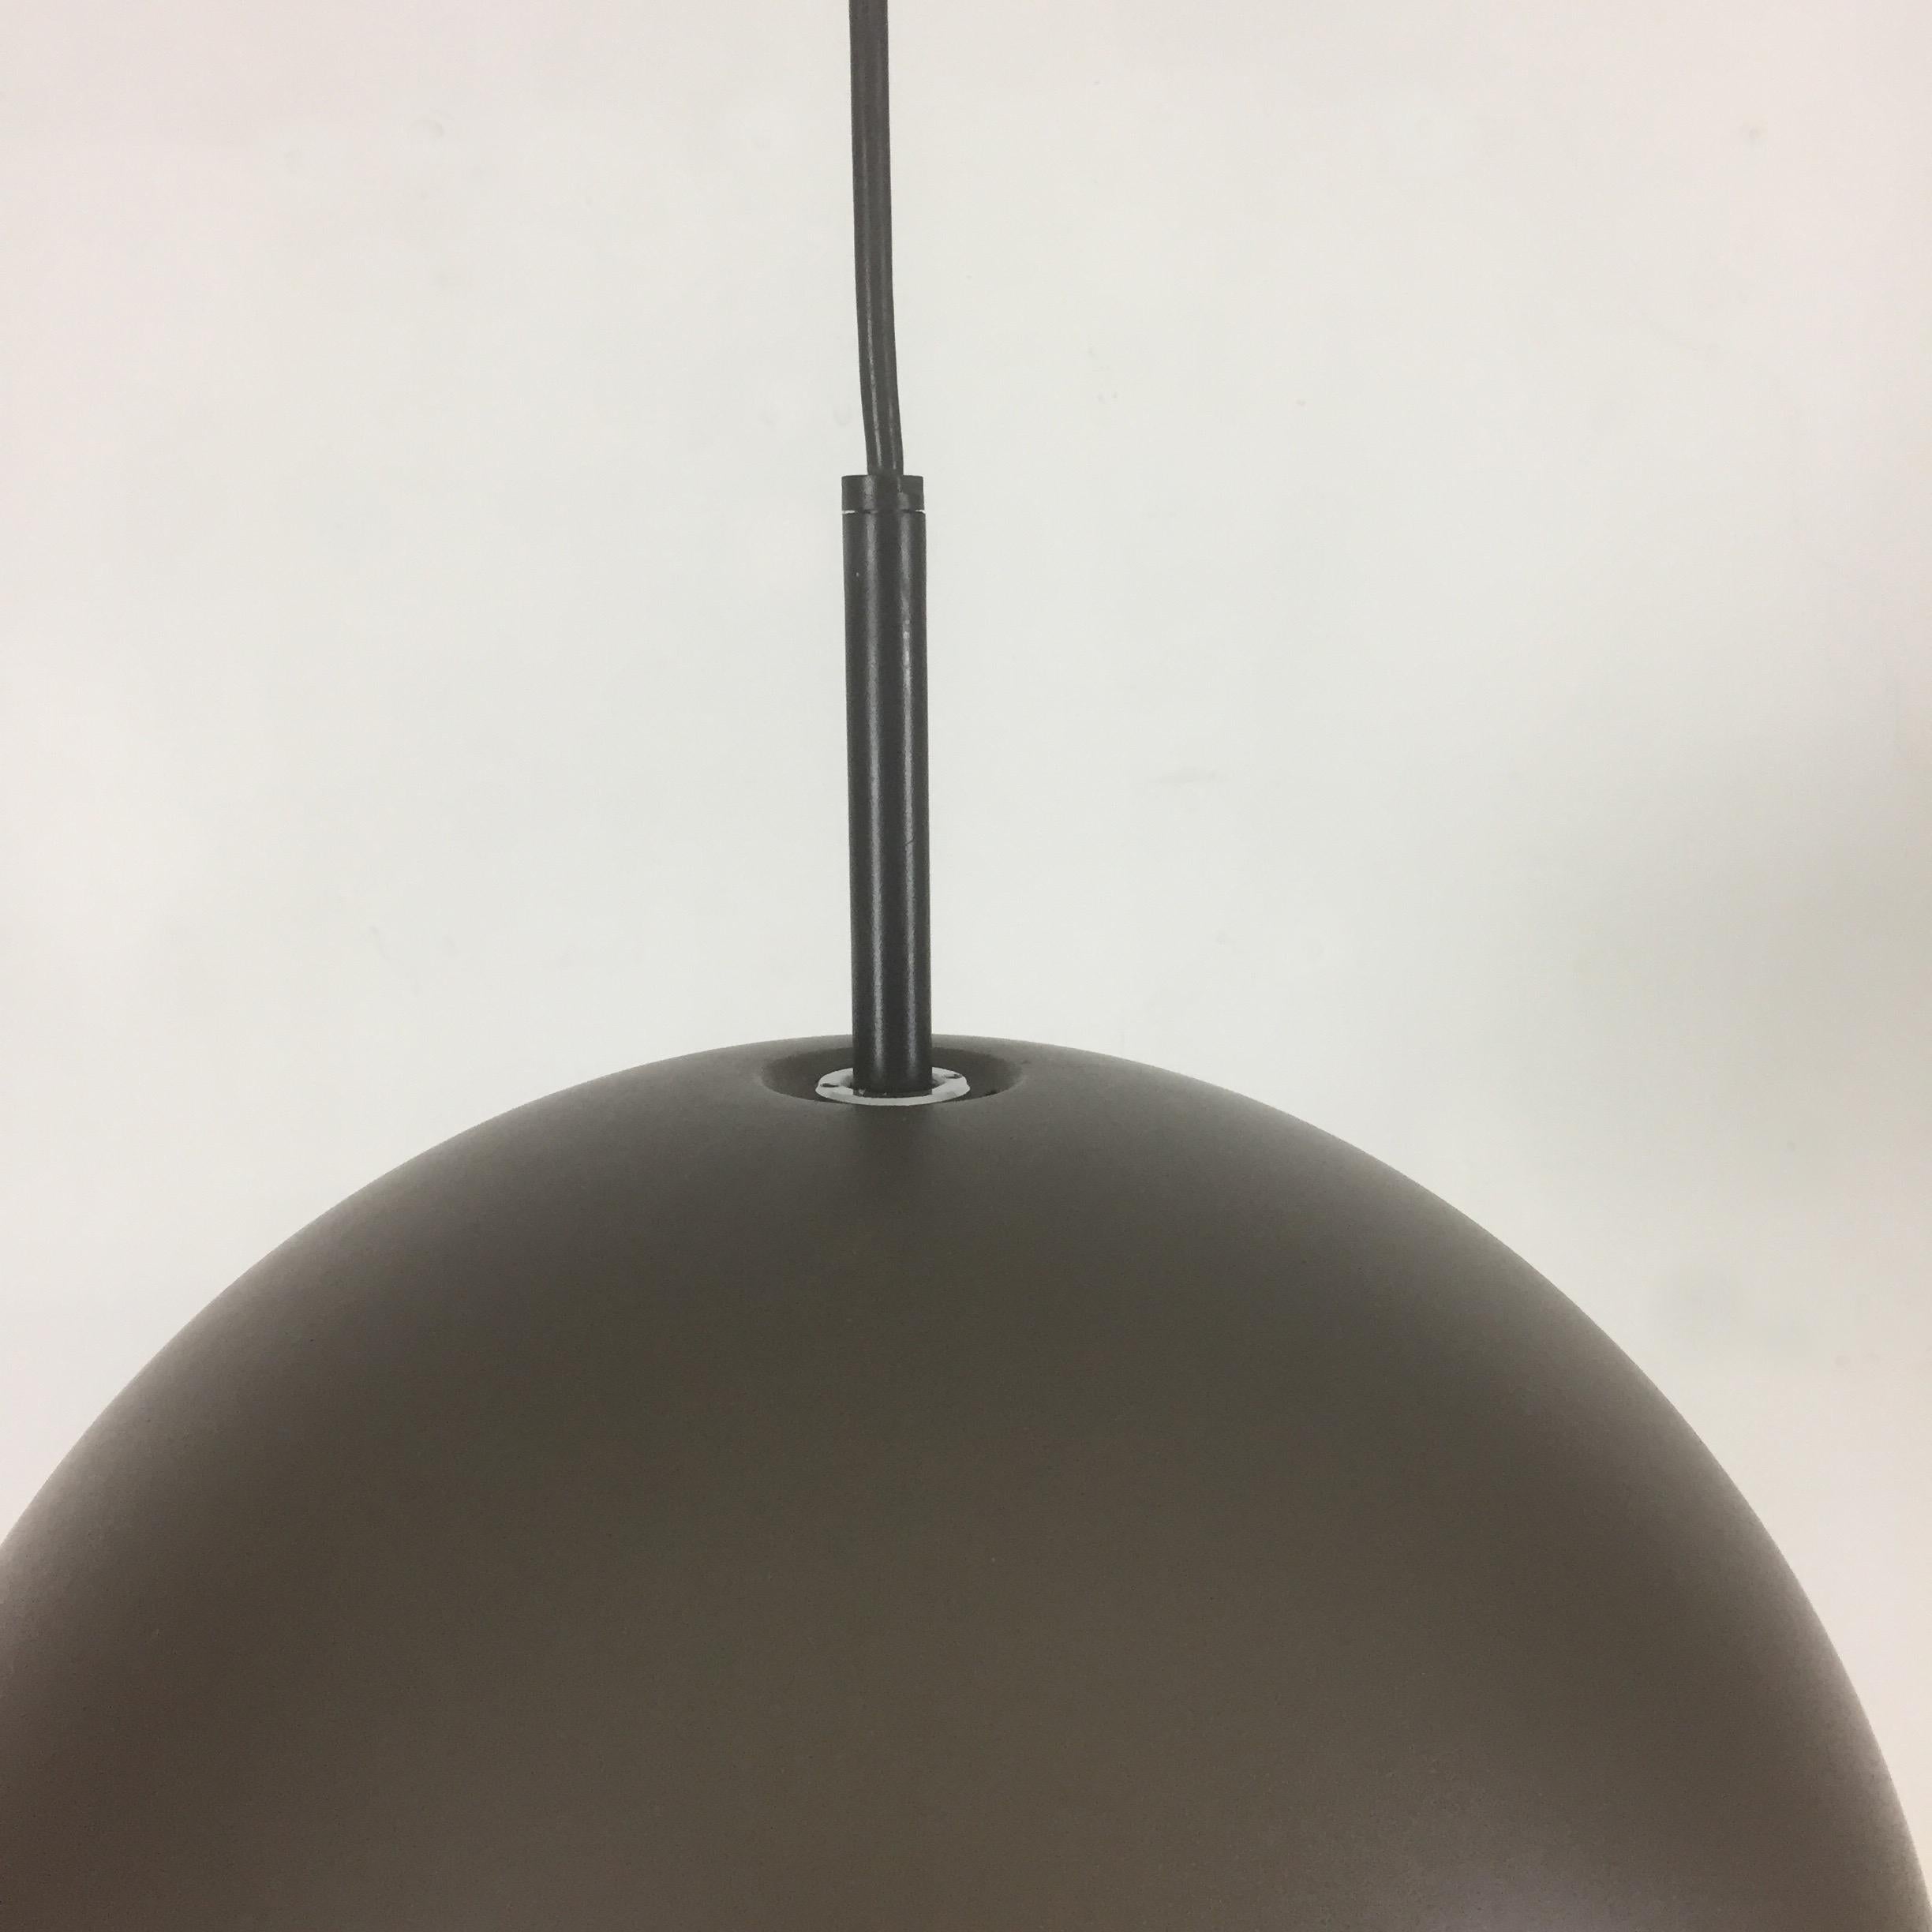 1970s Brown Metal Bubble Hanging Light by Rolf Krüger for Staff Lights, Germany For Sale 1